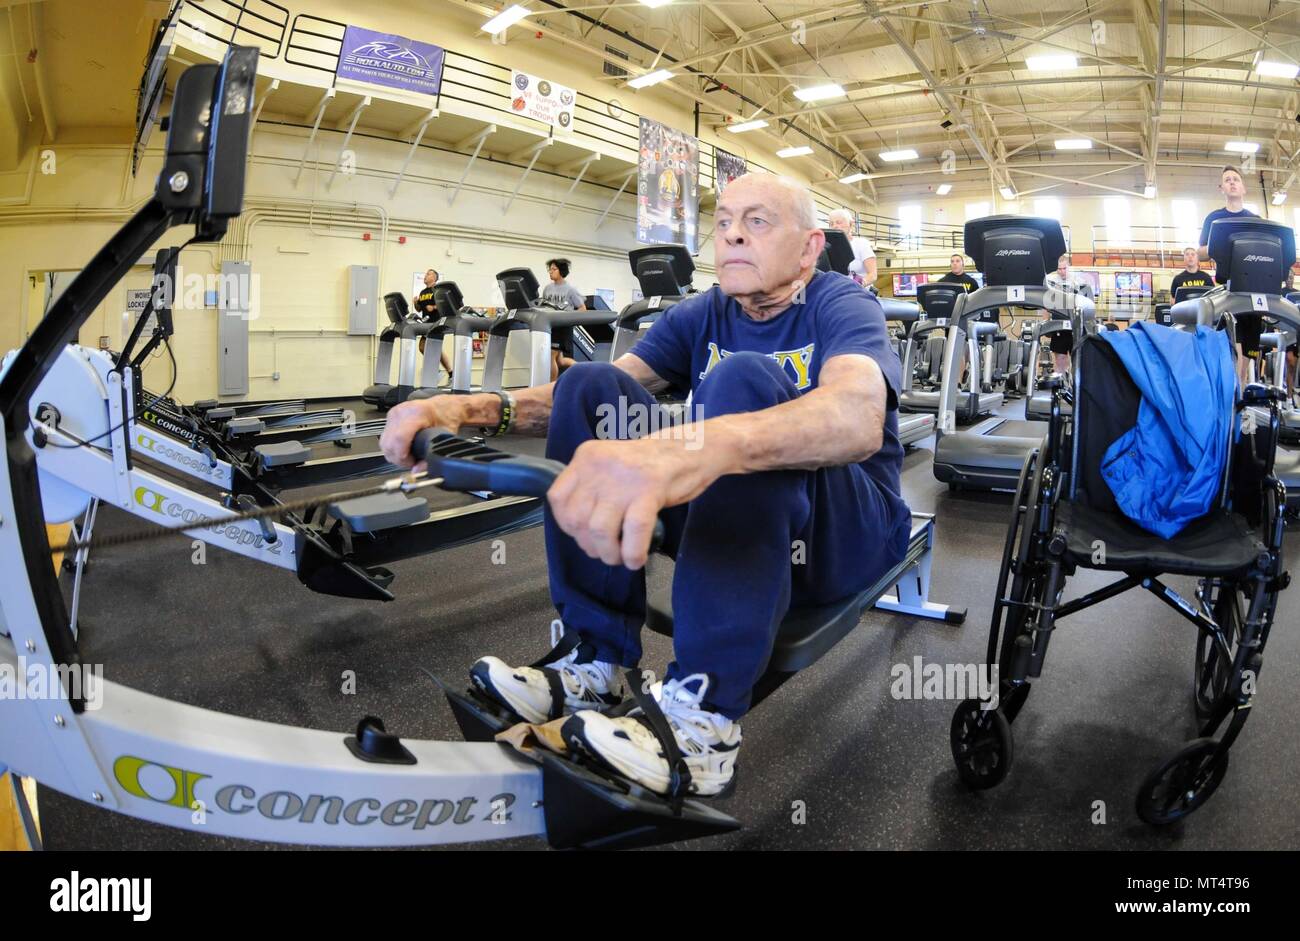 Retired Navy Chief Petty Officer Kimble Hartwell works out at Jensen Family  Health and Fitness Center on Joint Base Lewis-McChord, June 21, 2017.  Hartwell a veteran of 25-years, enjoys using the rowing